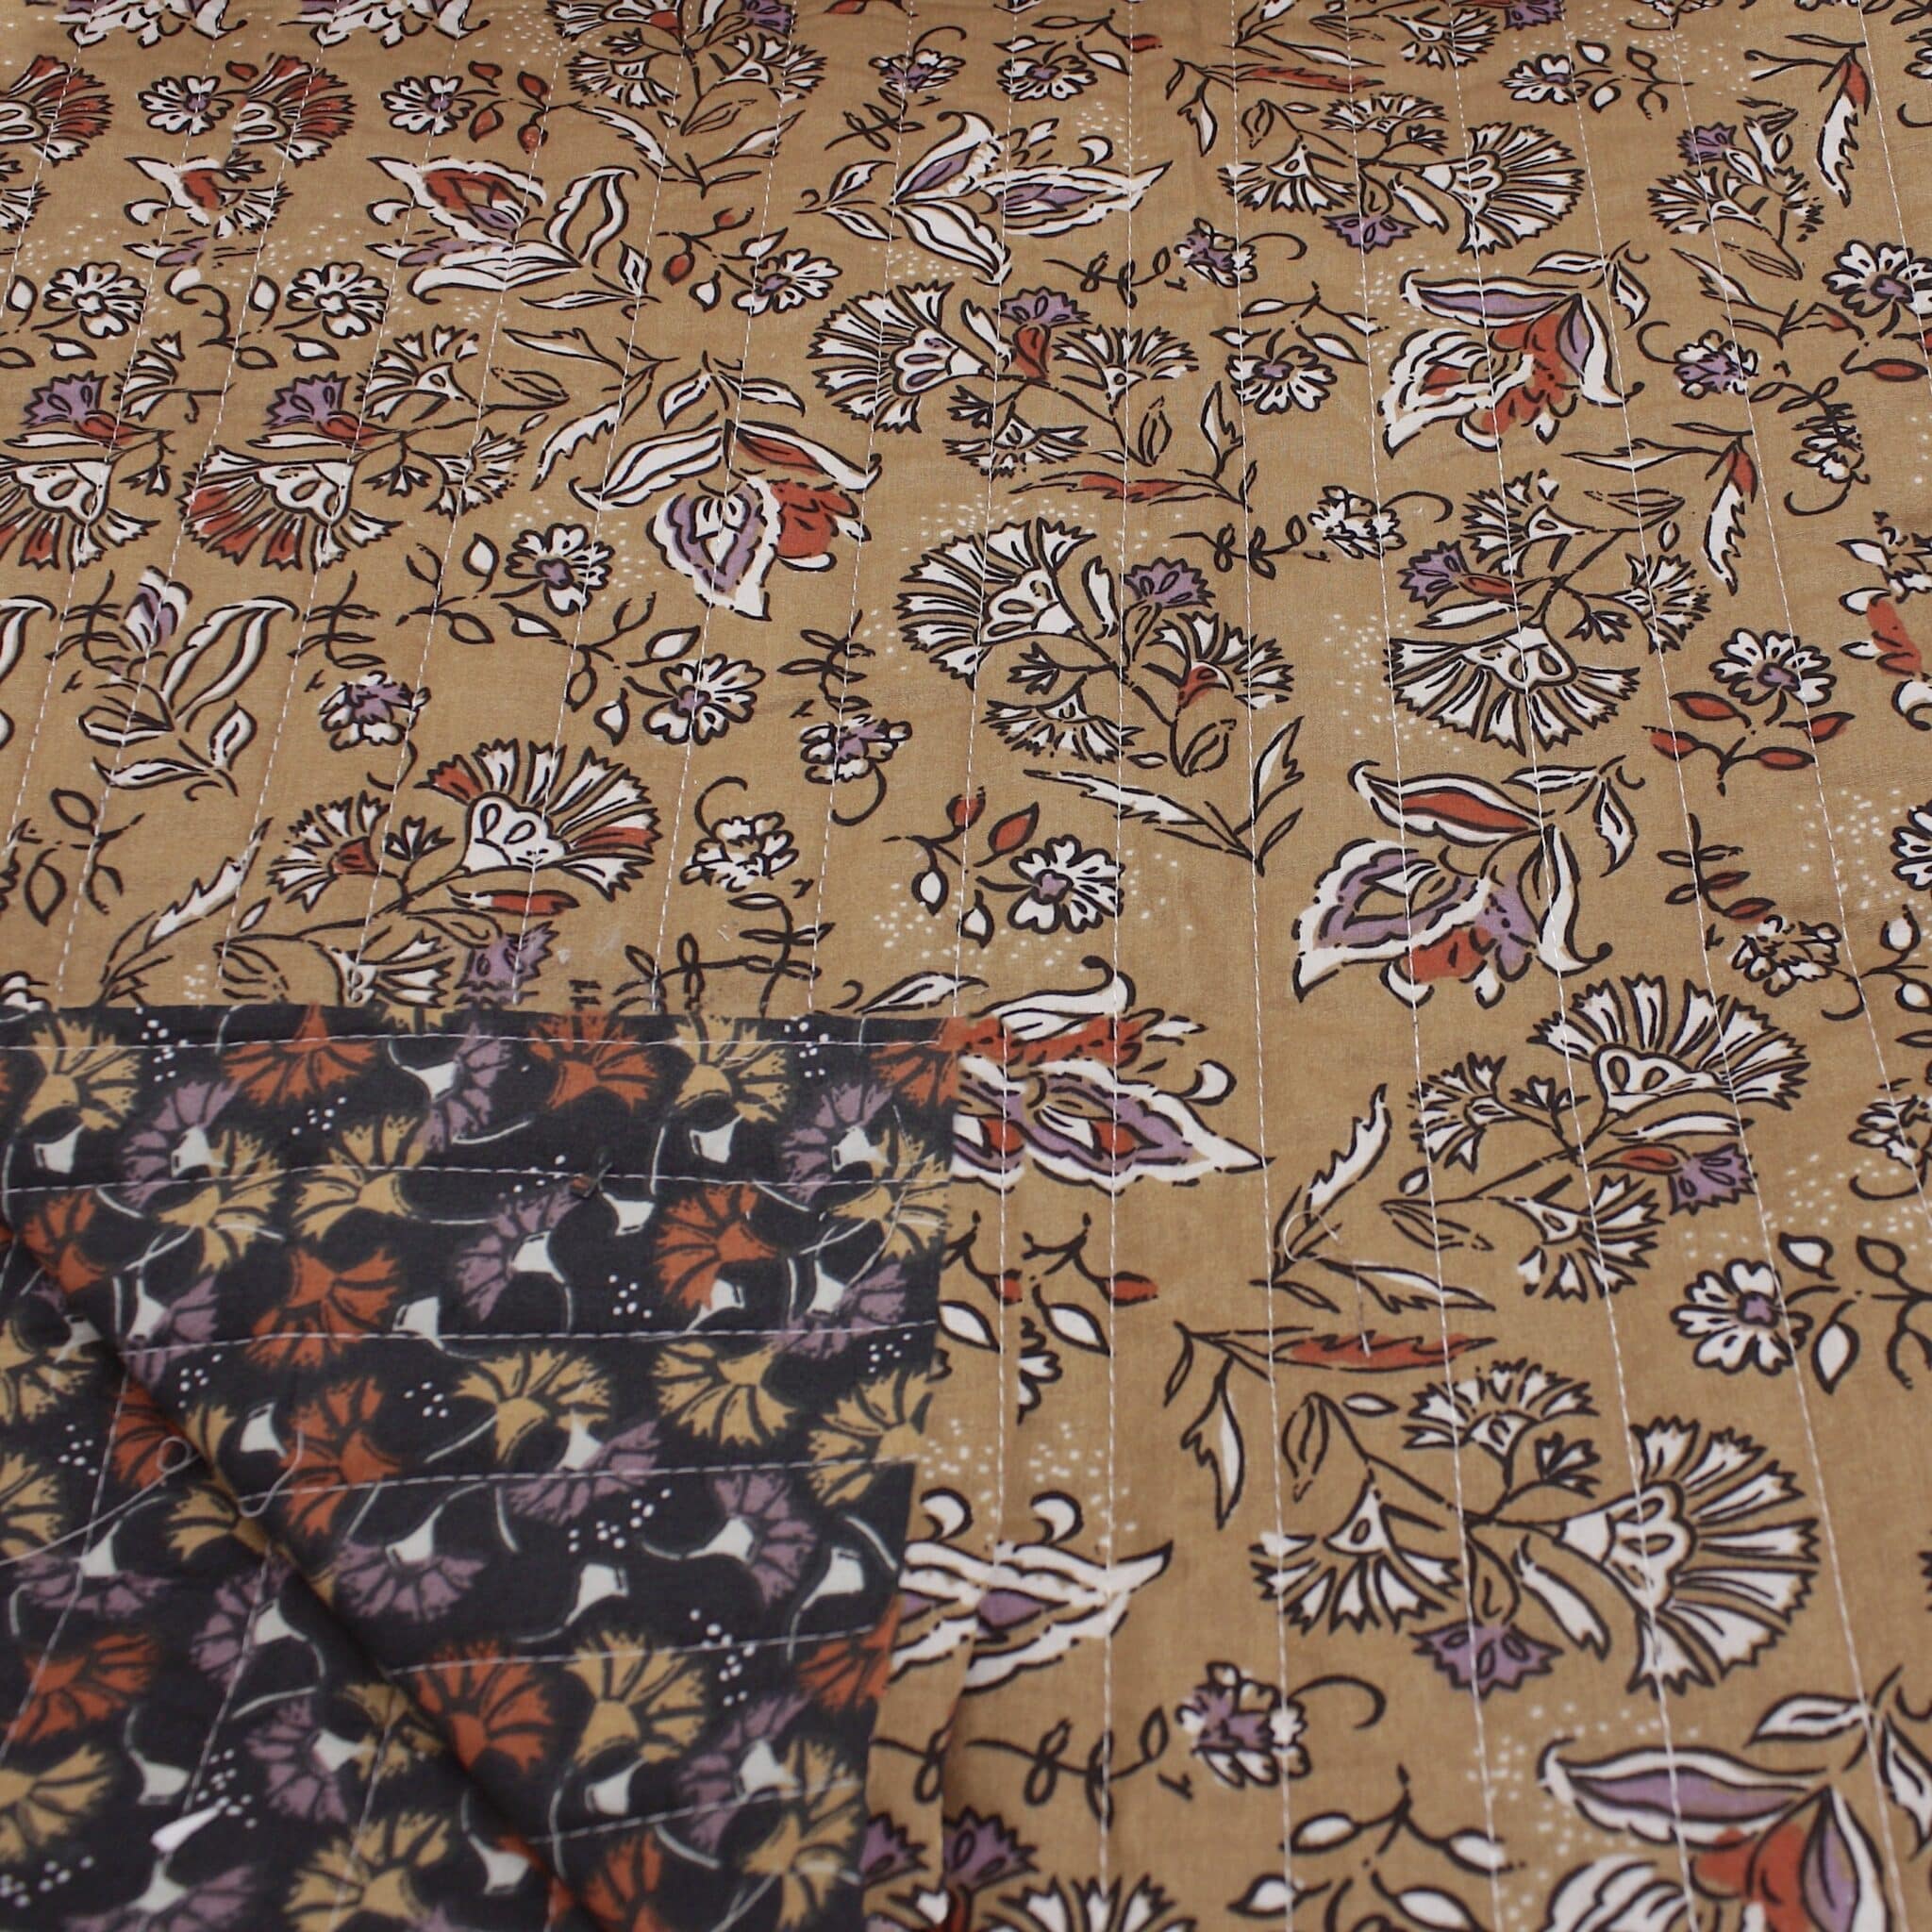 Quilted double sided cotton fabric in elegant rich tones of brown floral design